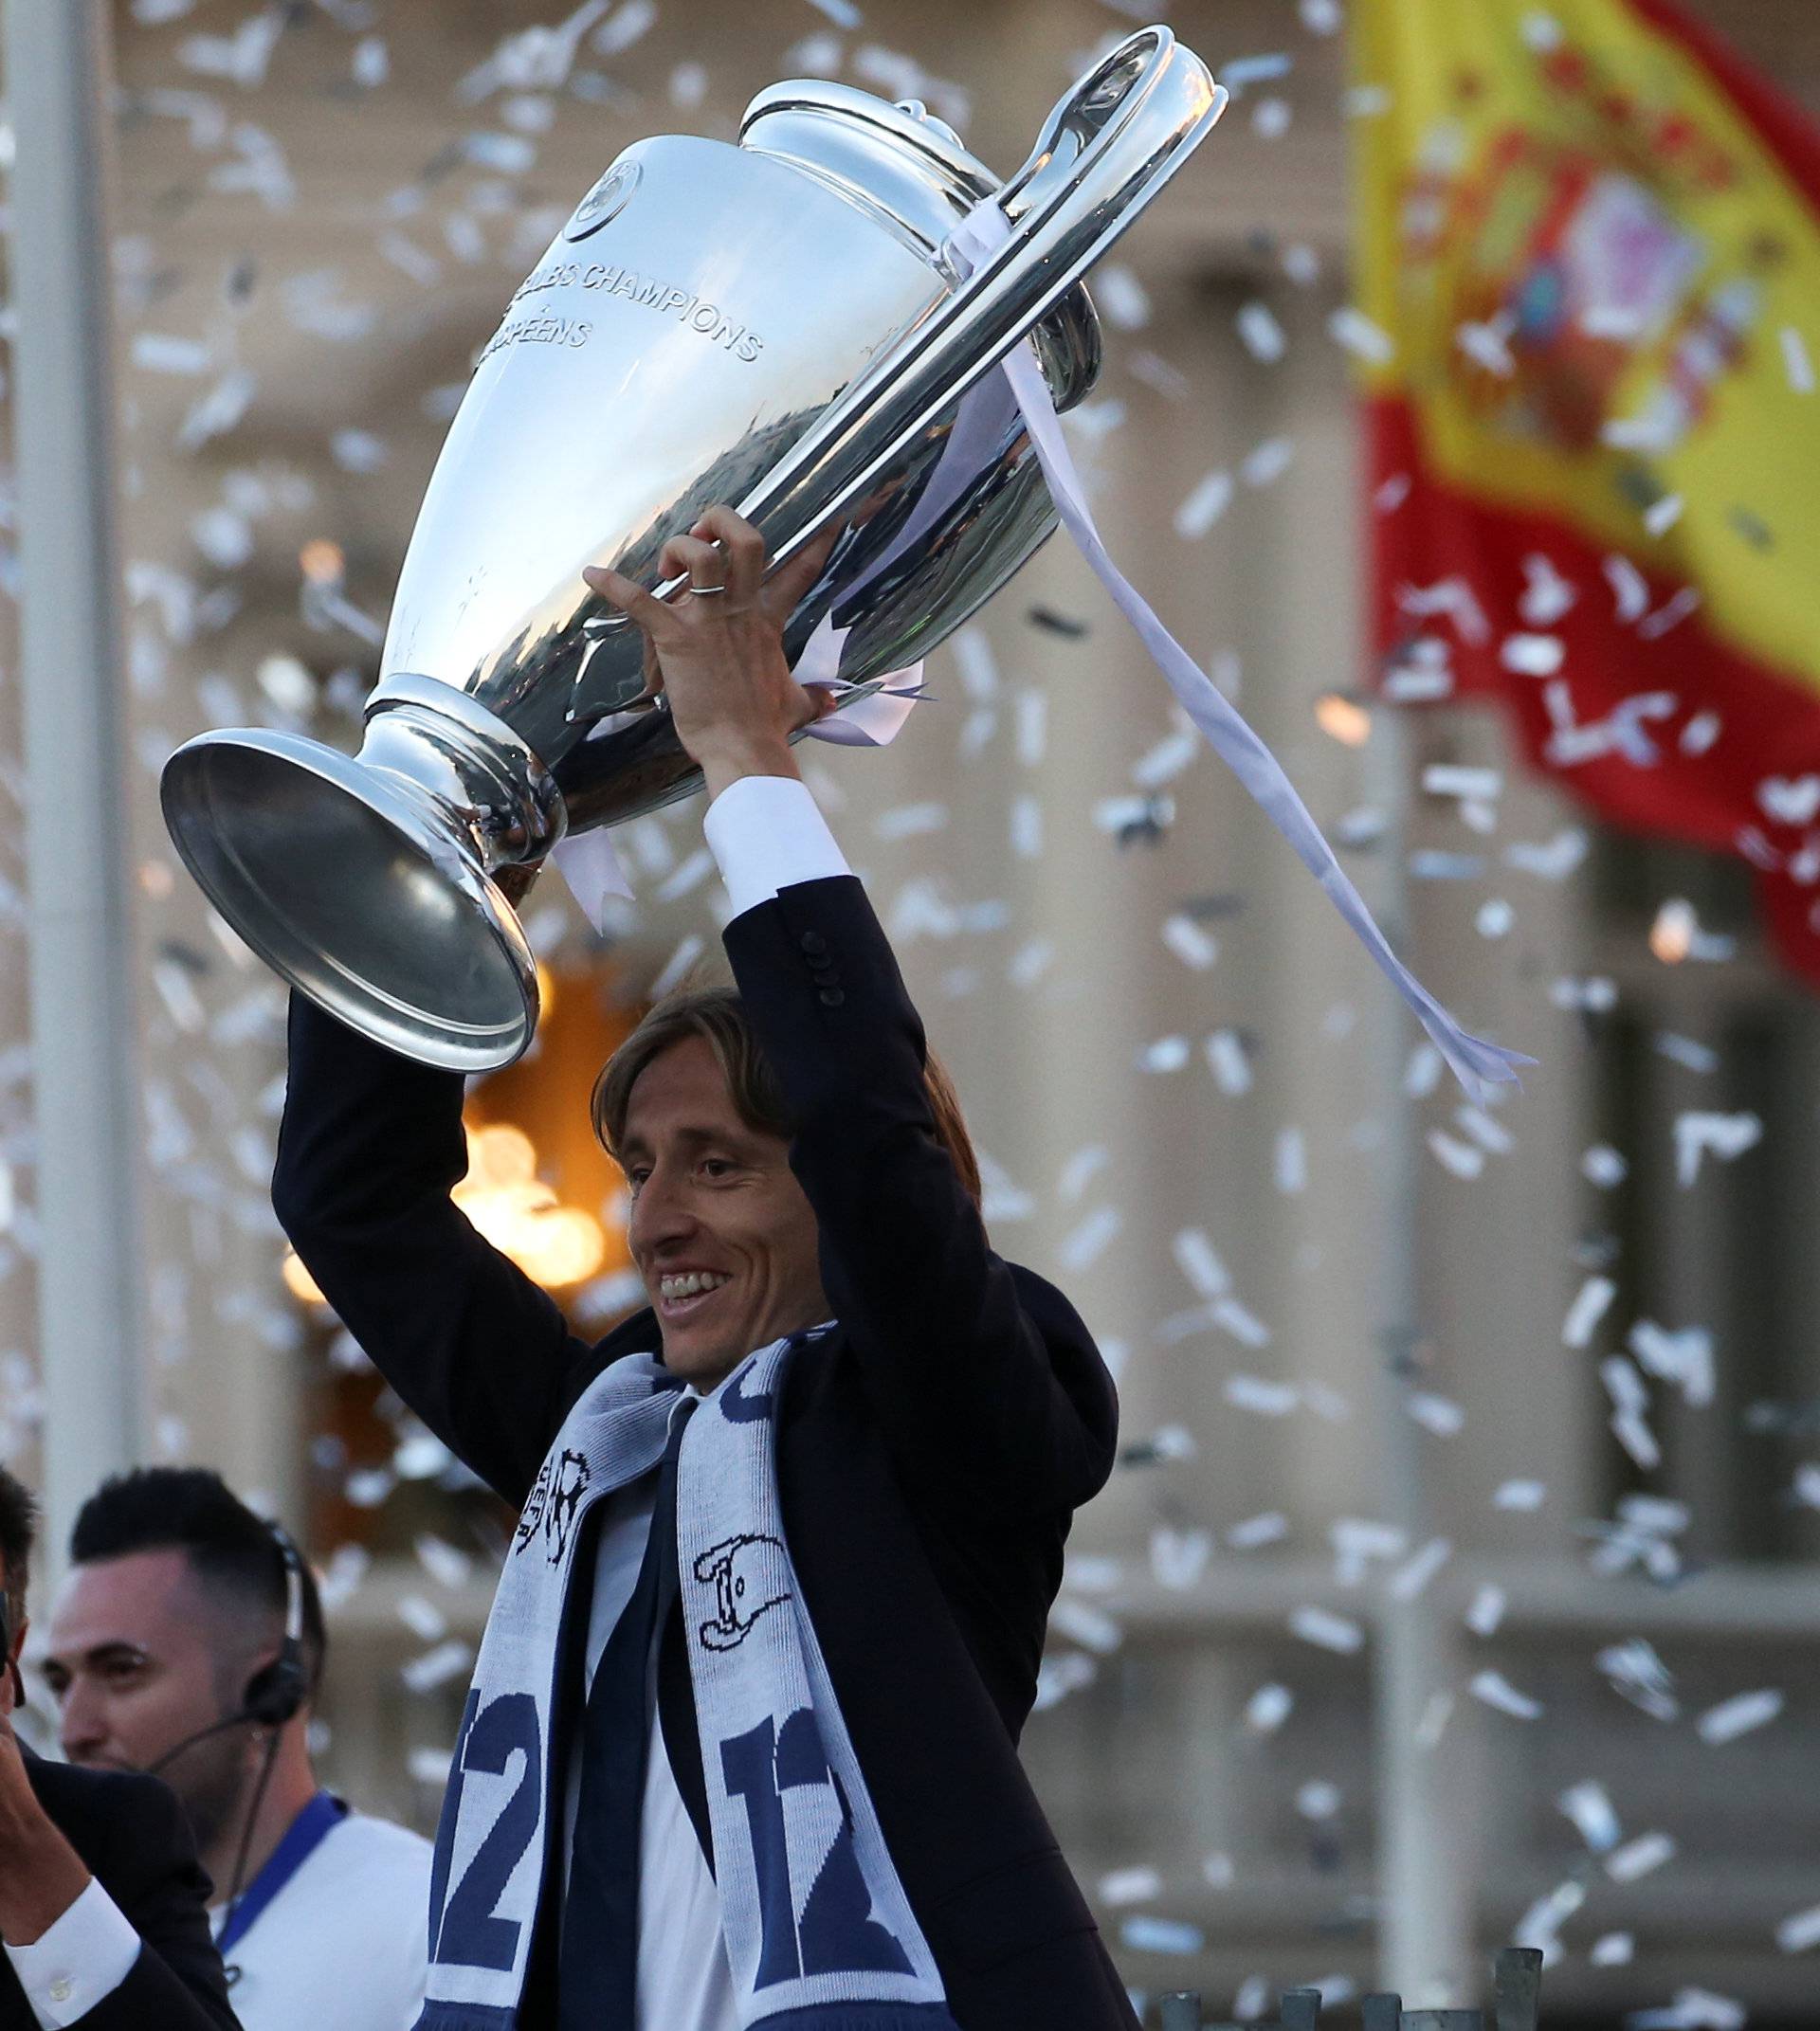 Real Madrid's Modric celebrates Champions League title at Cibeles Fountain in Madrid